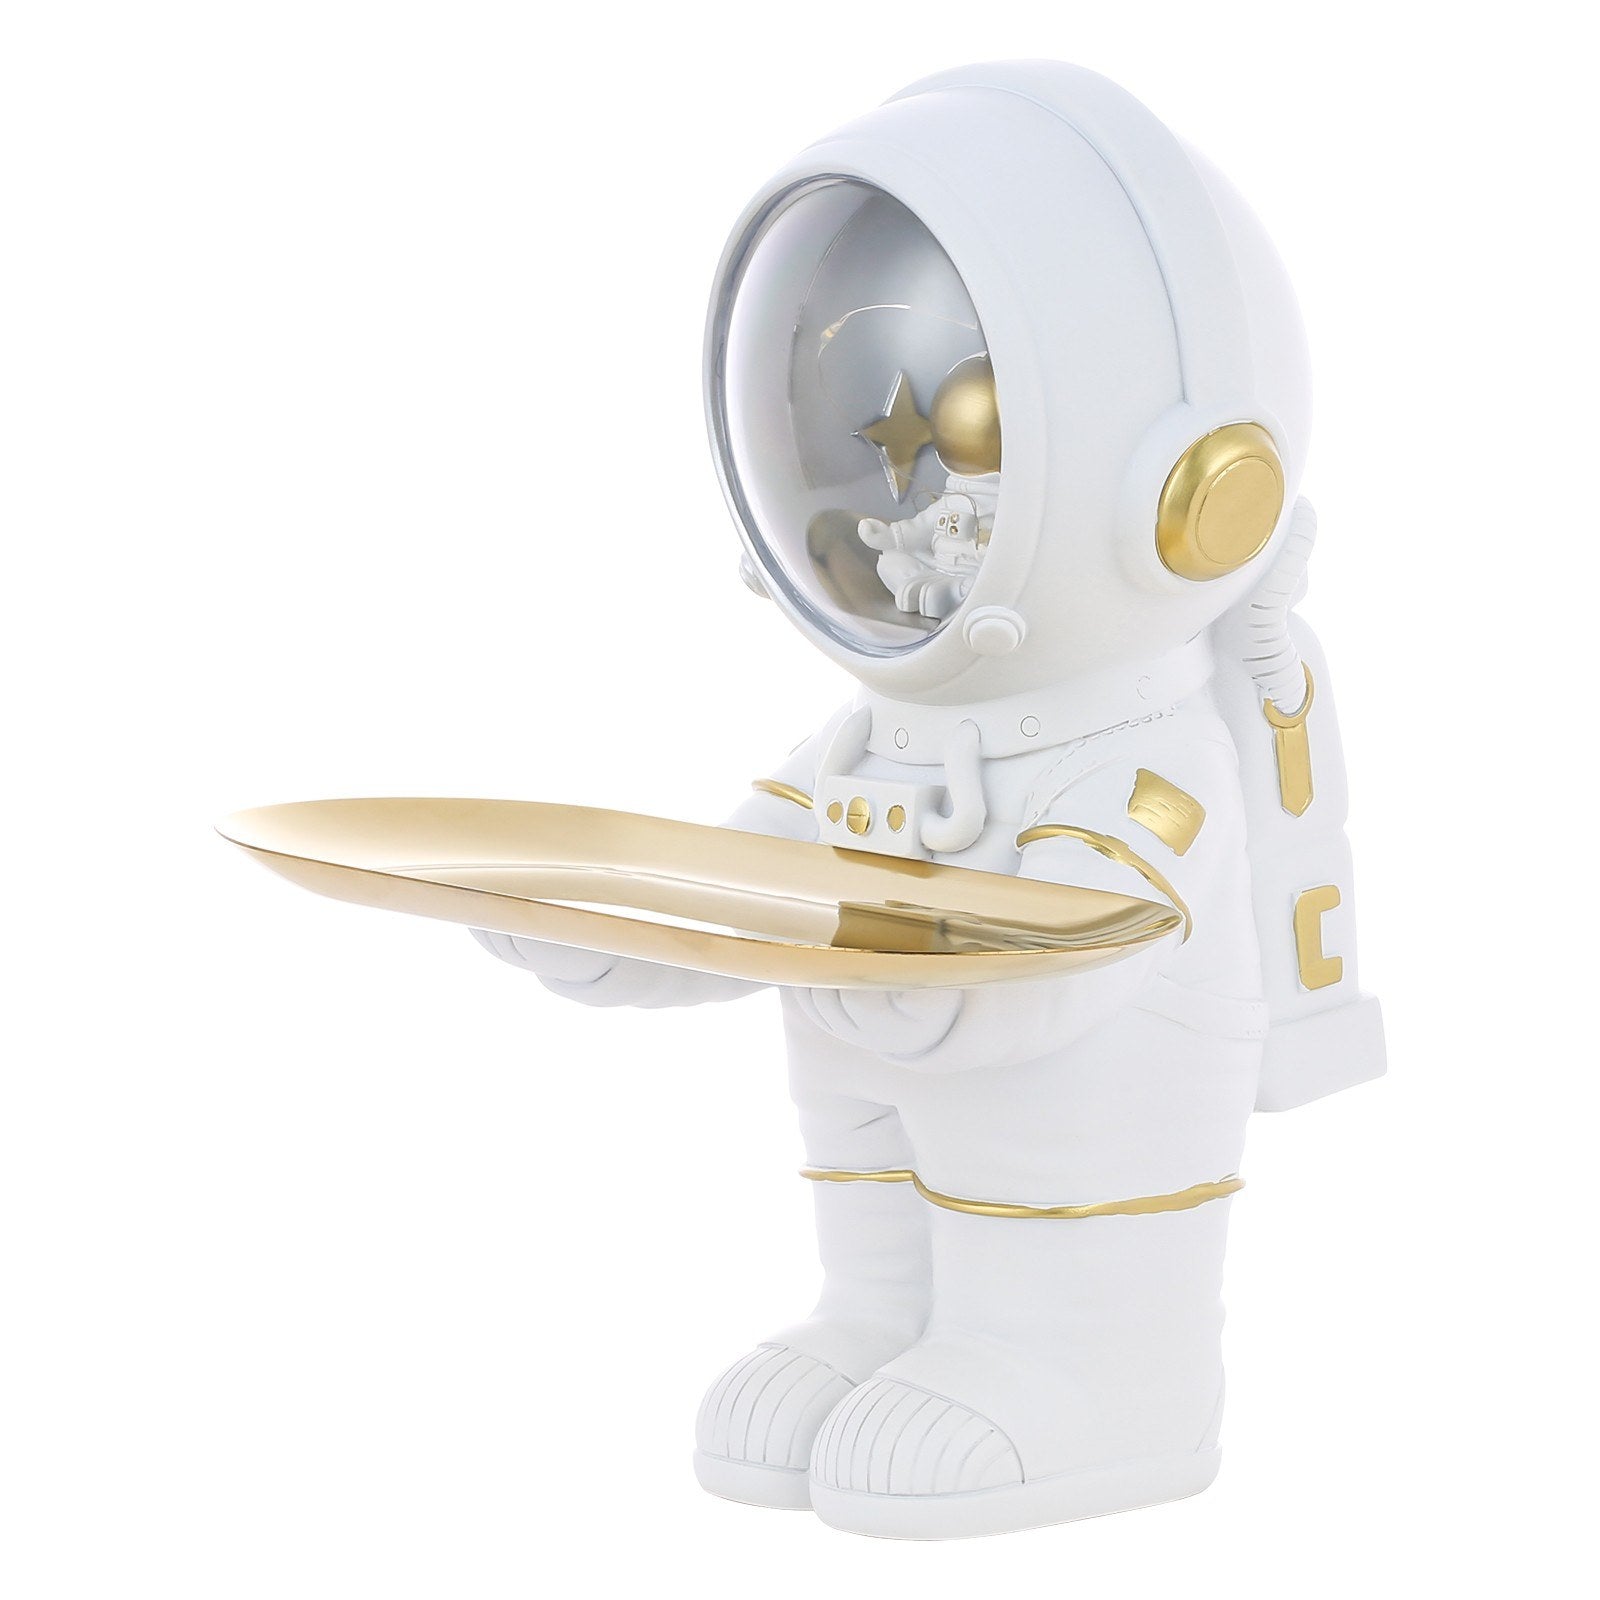 For those who want to feel like they're on a journey through space and just not earth, we present the astronaut figurine